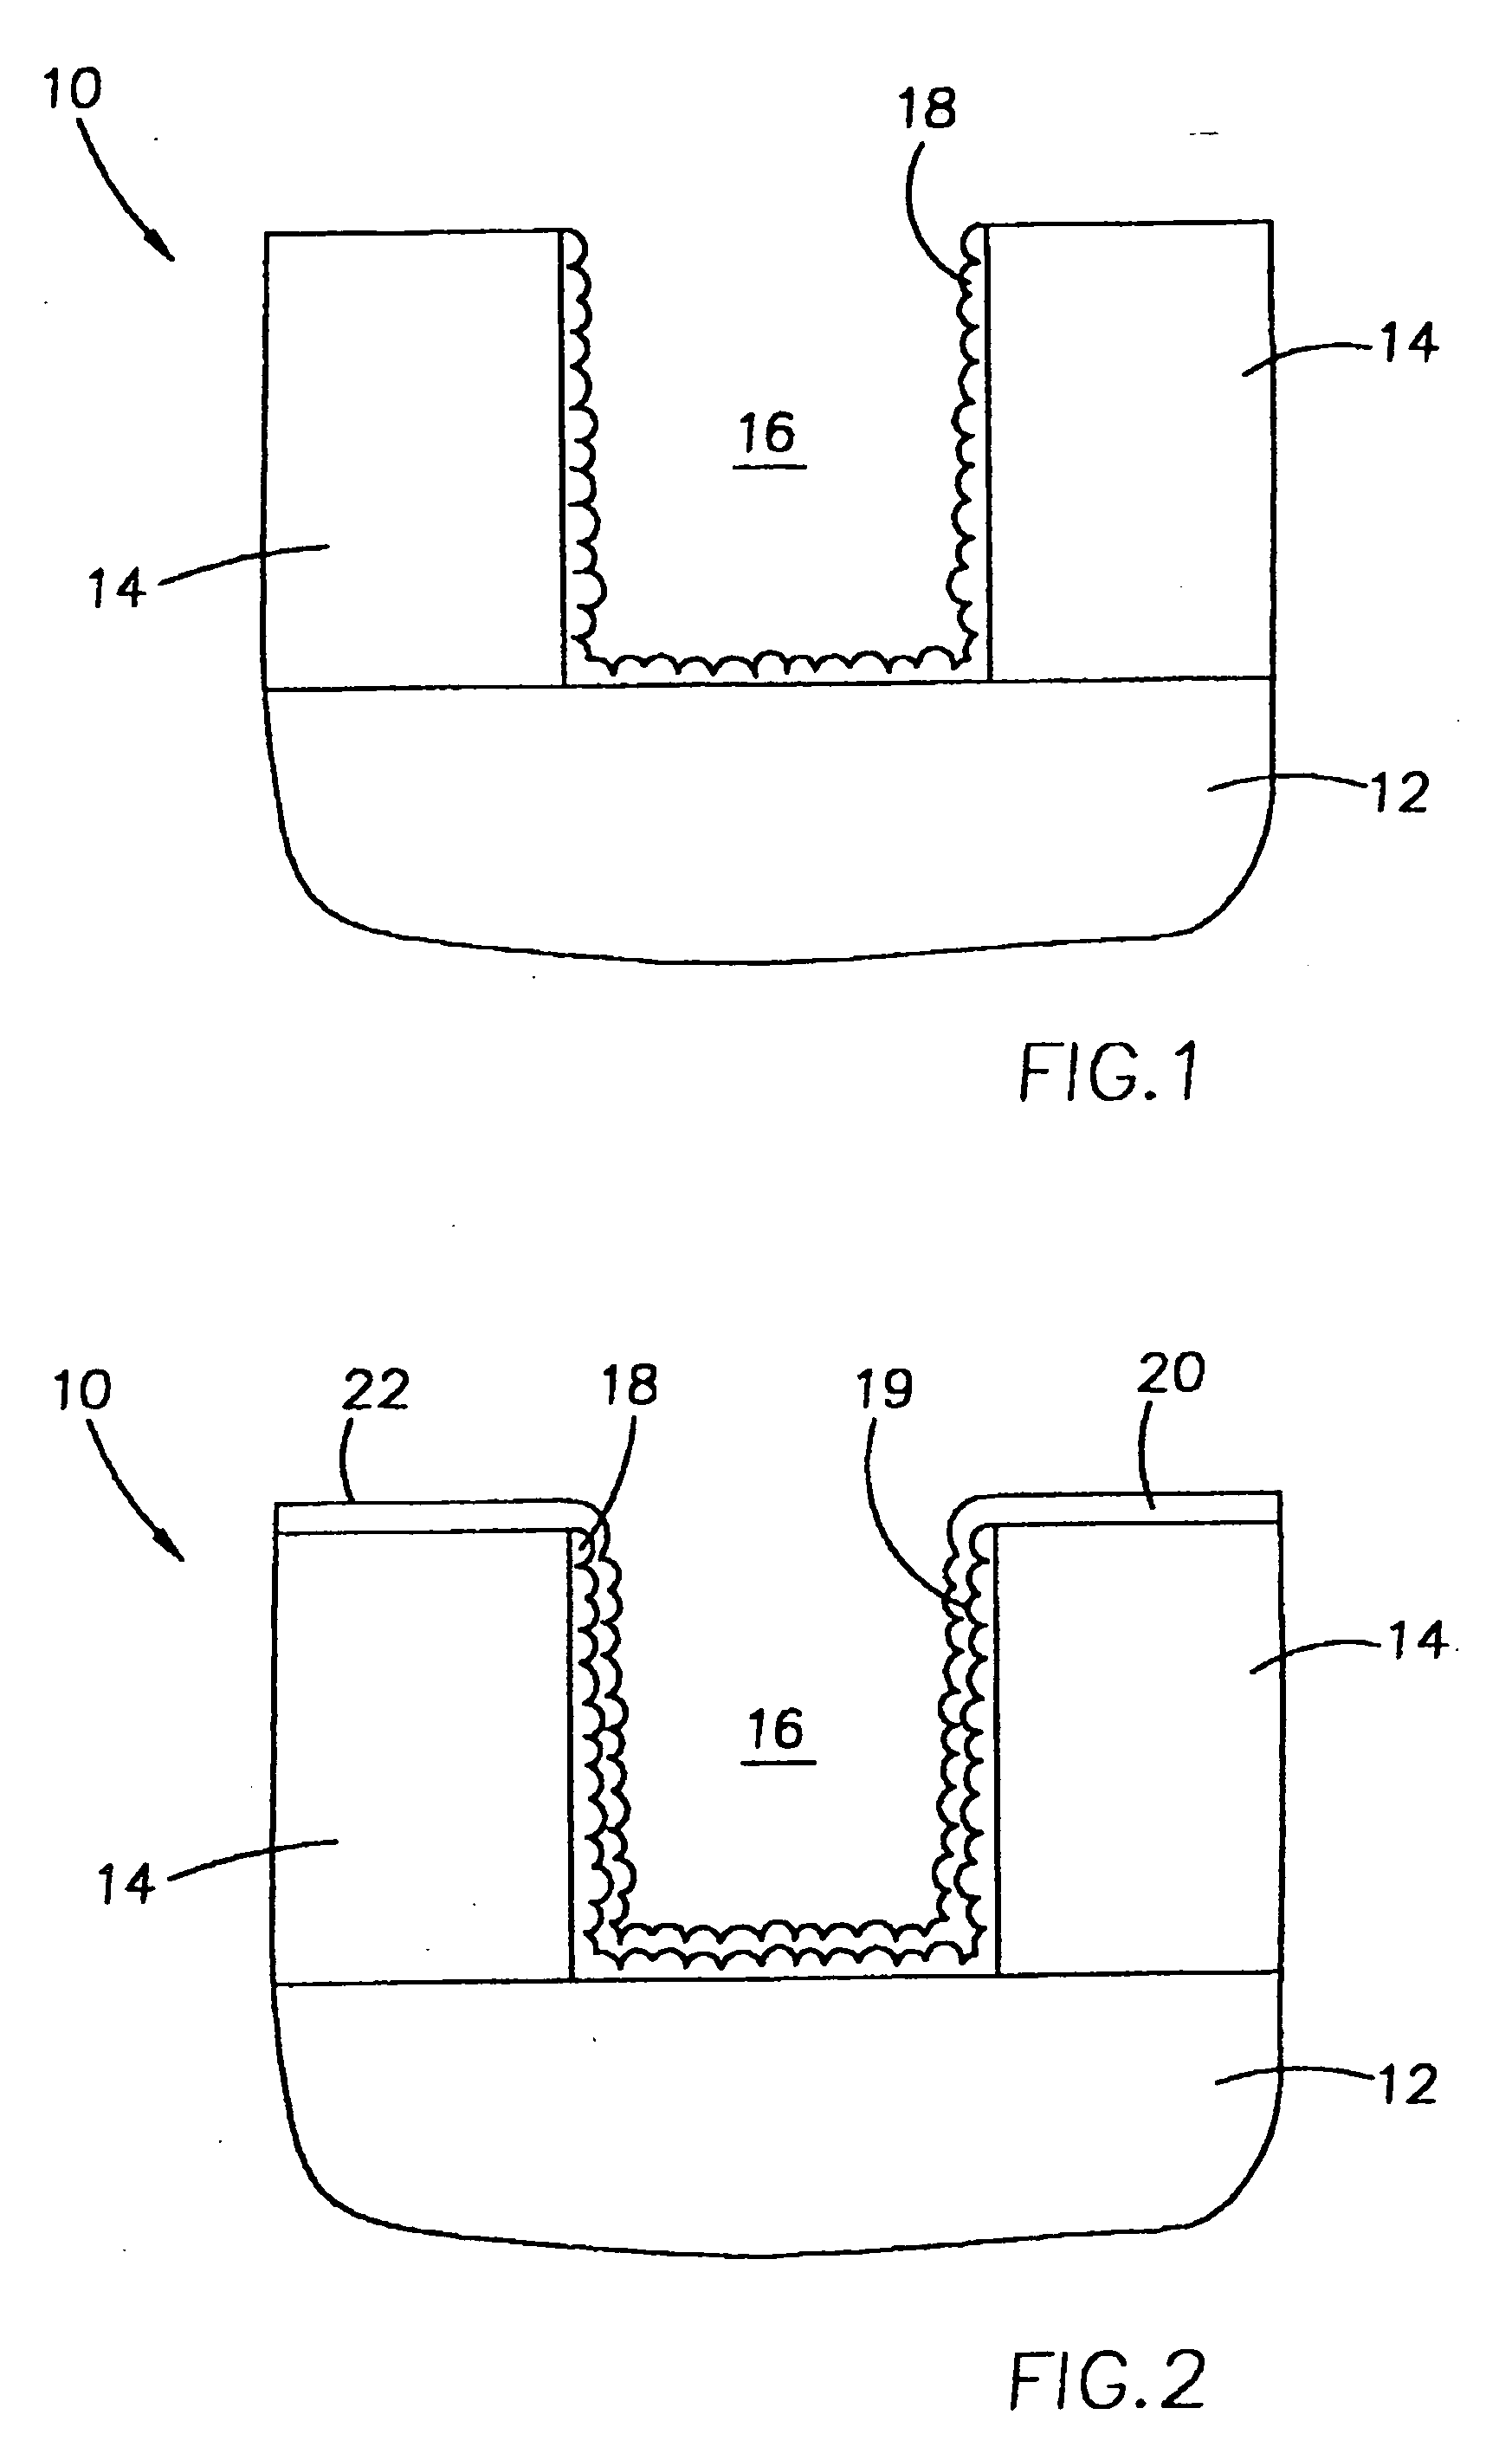 Method of improved high K dielectric - polysilicon interface for CMOS devices